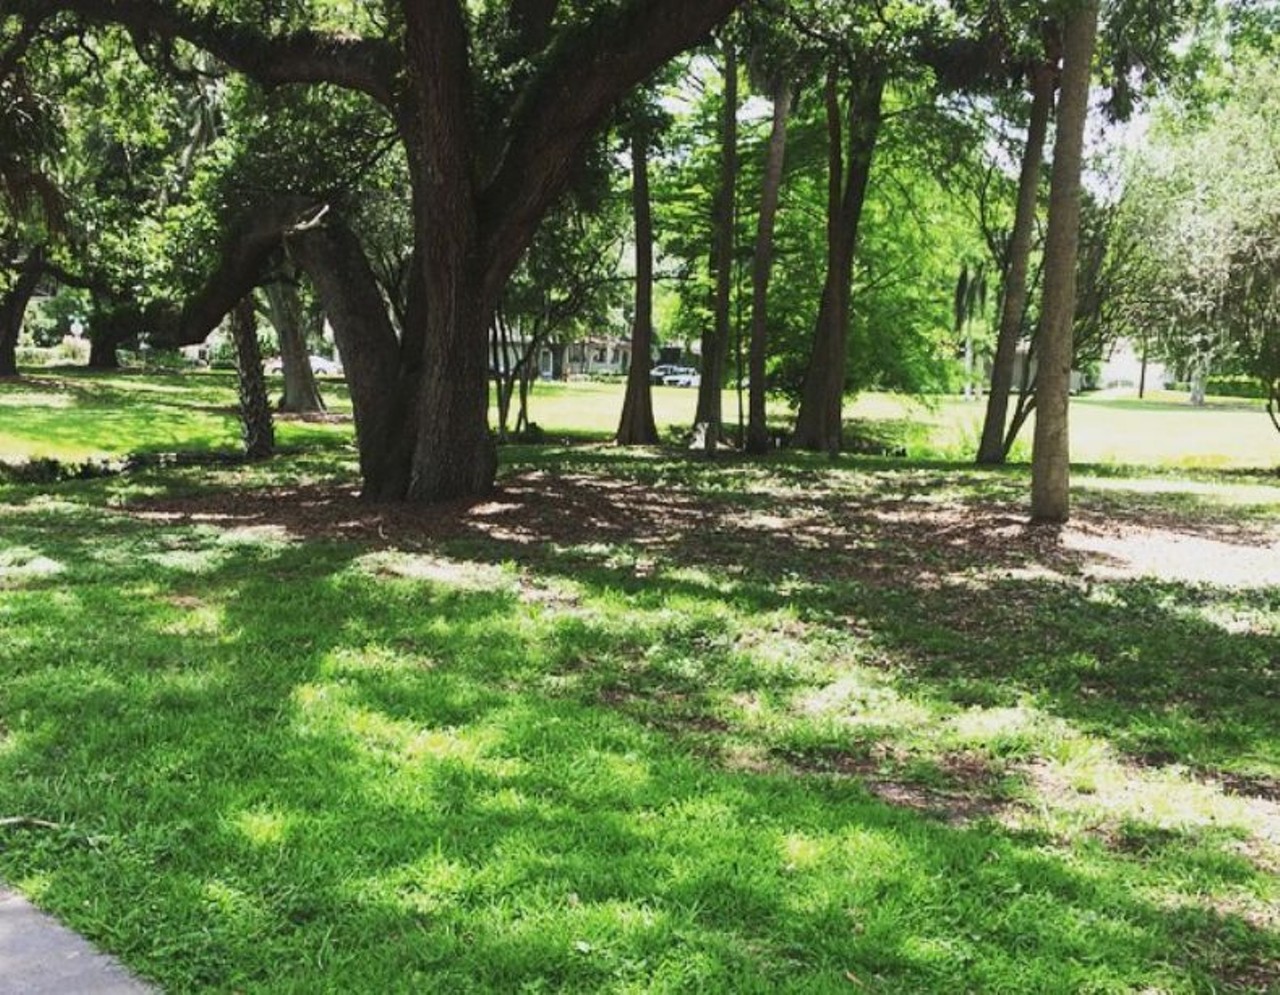 Al Coith Park  
901 Delaney Ave
This park has a ton of open space as well as large trees with plenty of shade. It also has a cricut station for those looking to get ready burn some extra calories outside.
Photo via yay_ak / Instagram